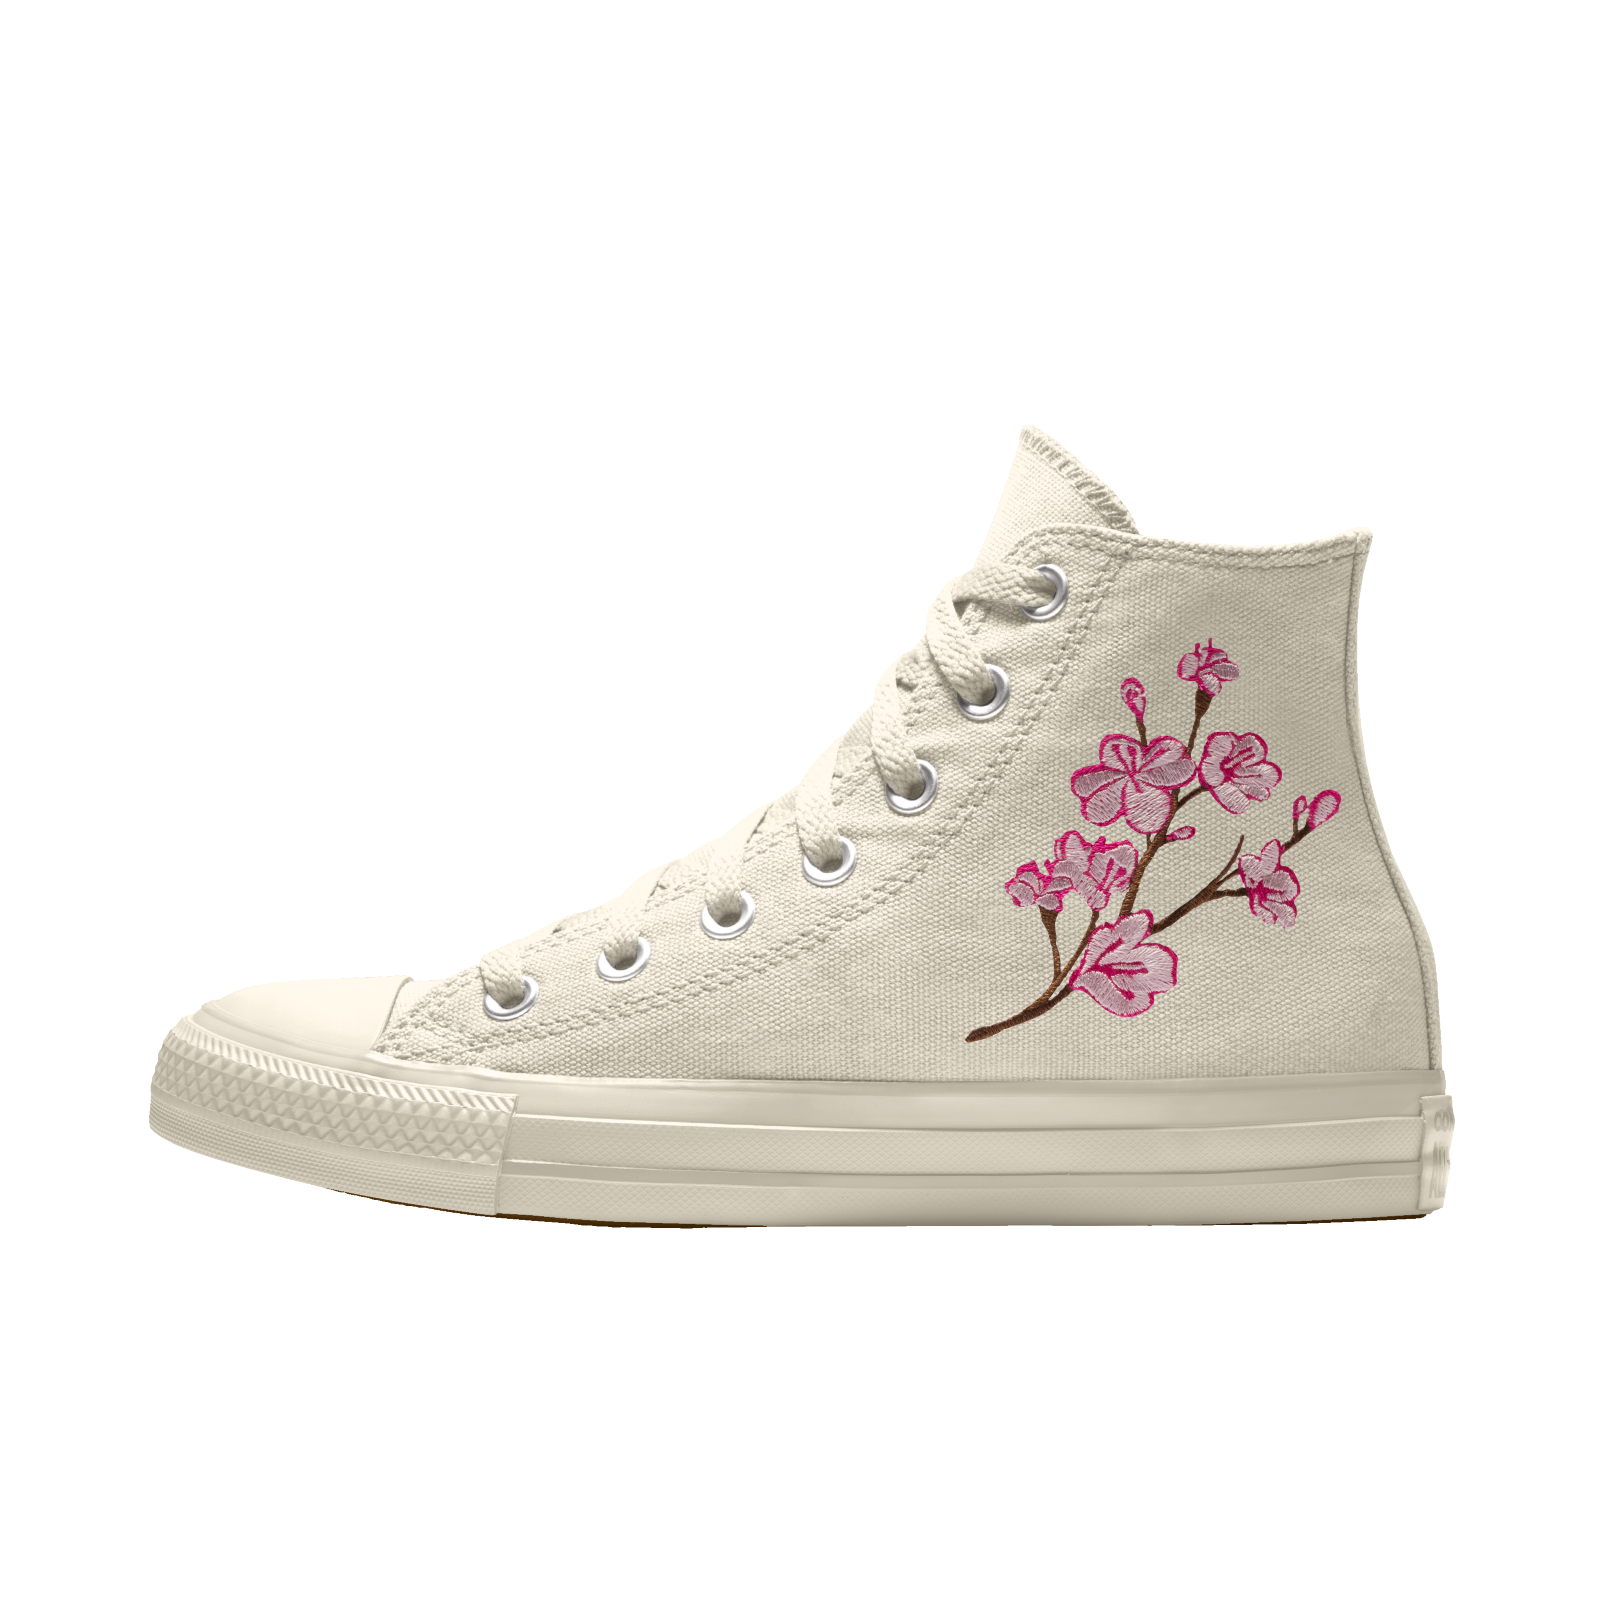 Converse Chuck Taylor All Star - Floral